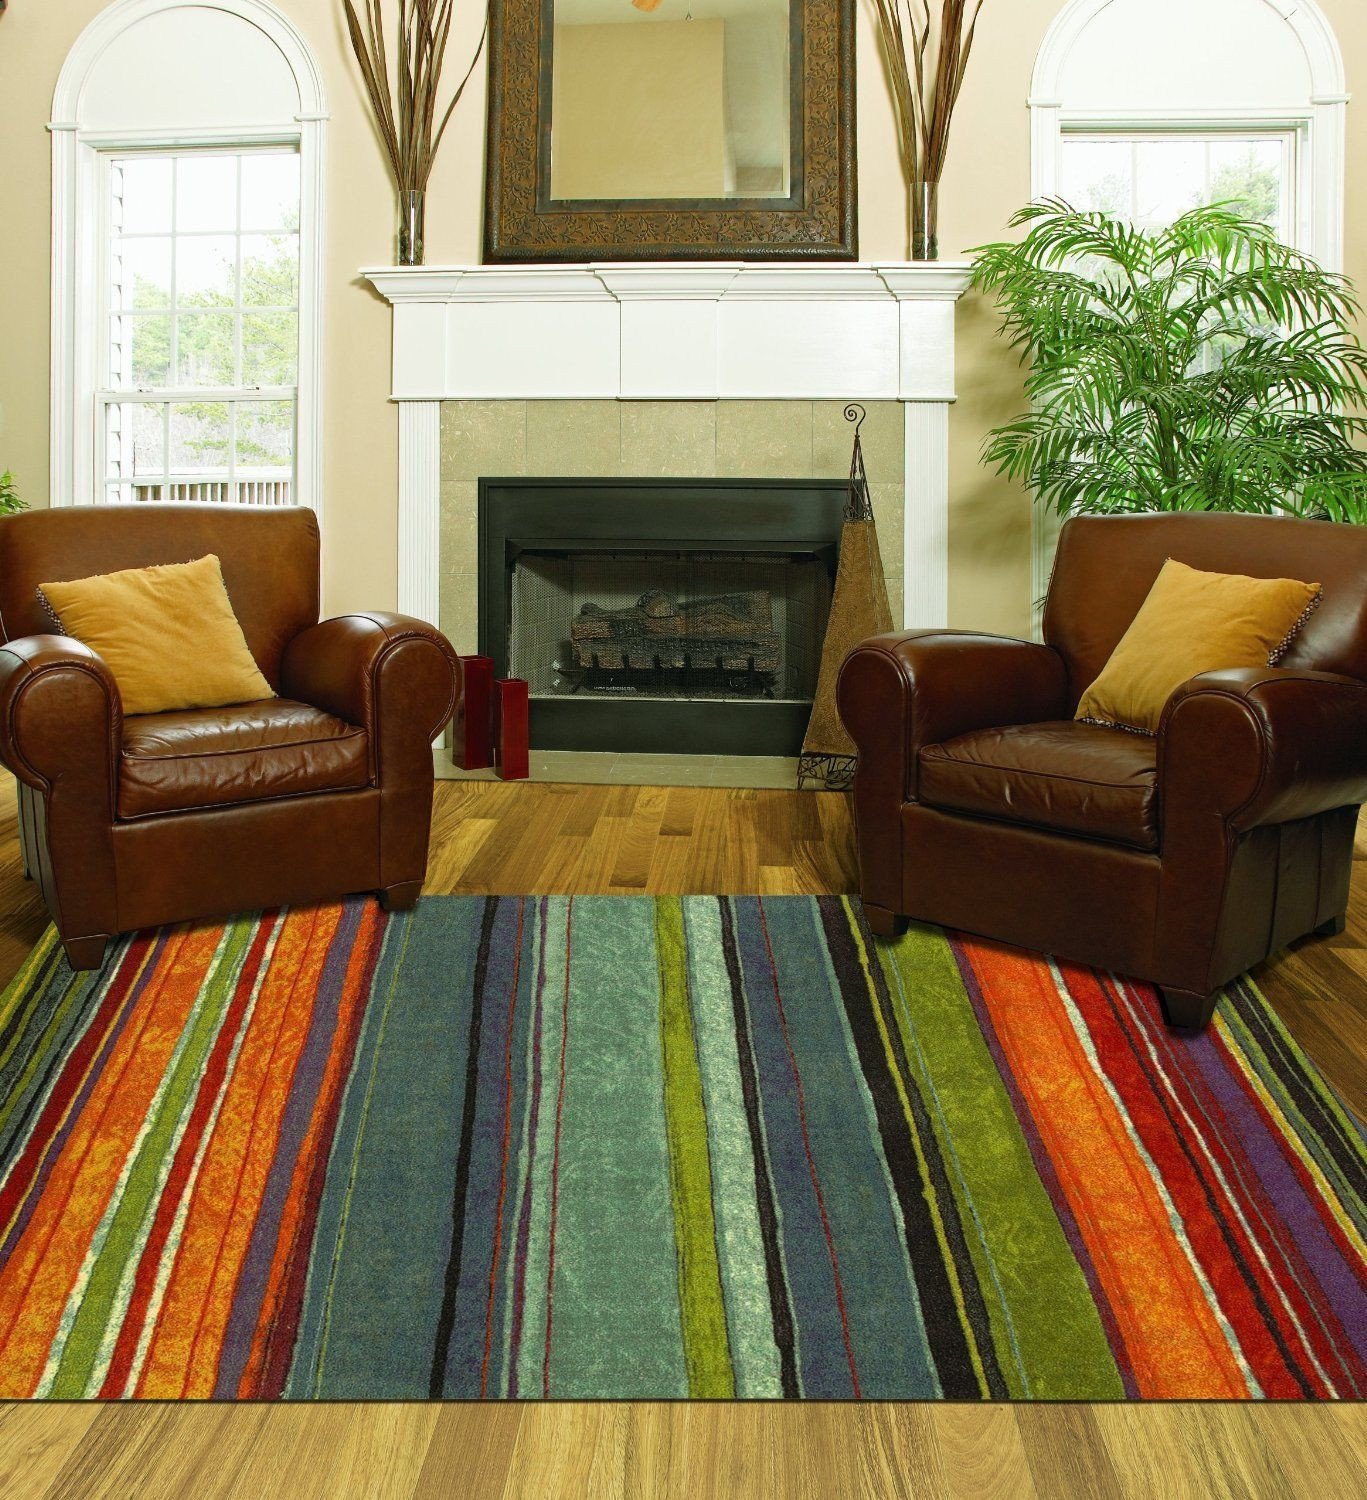 Rug for Living Room Ideas Beautiful area Rug Colorful 8x10 Living Room Size Carpet Home